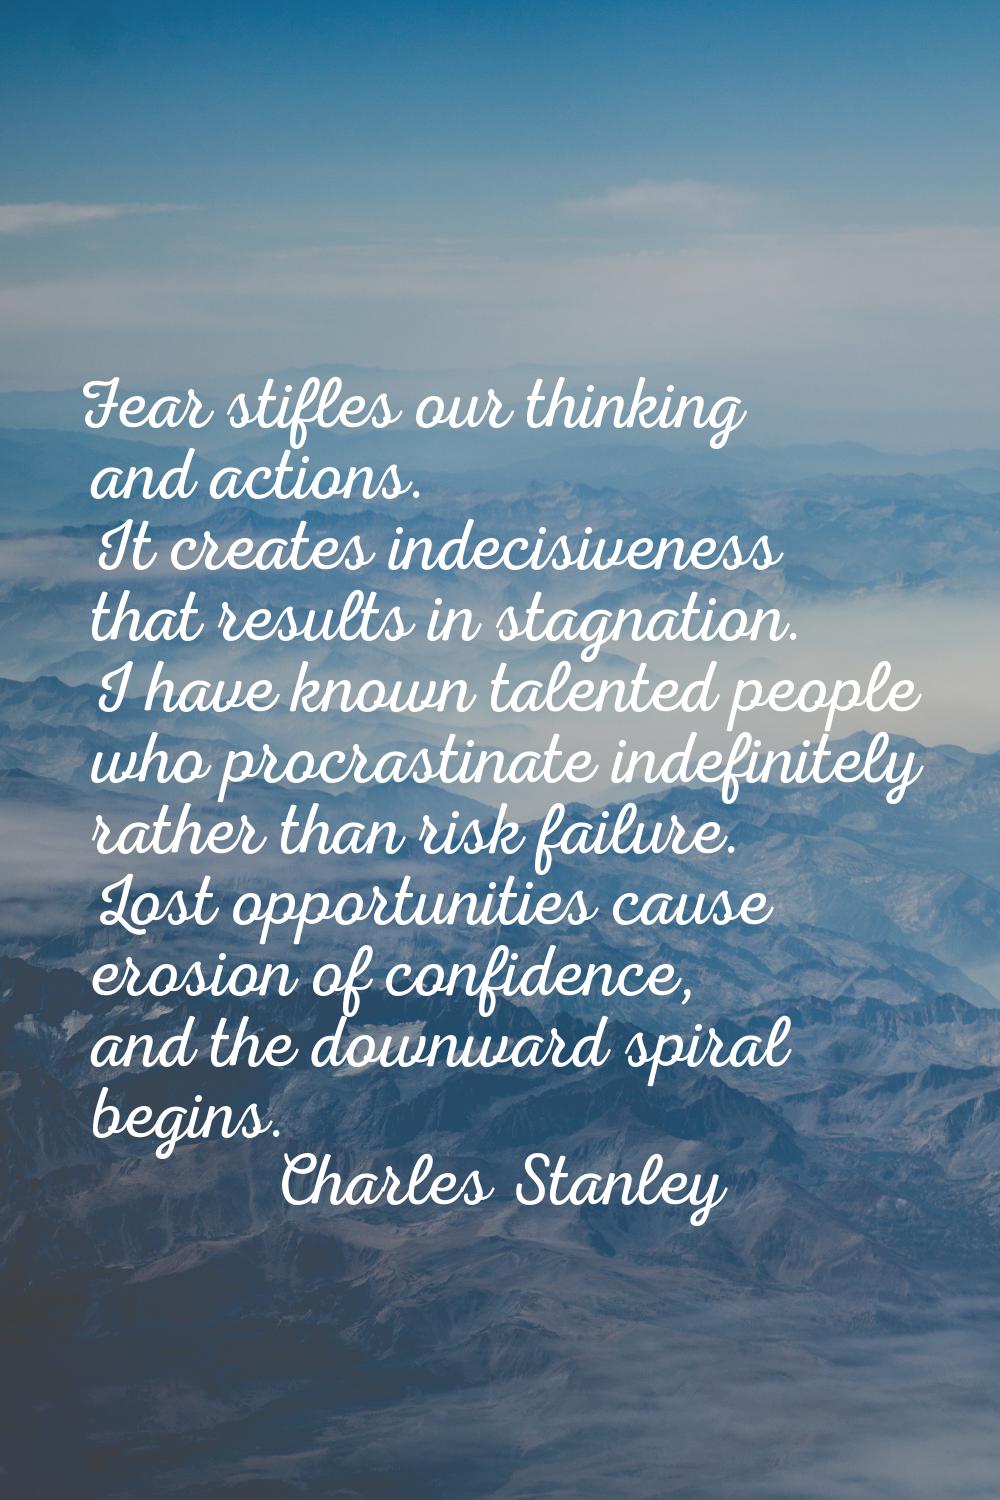 Fear stifles our thinking and actions. It creates indecisiveness that results in stagnation. I have